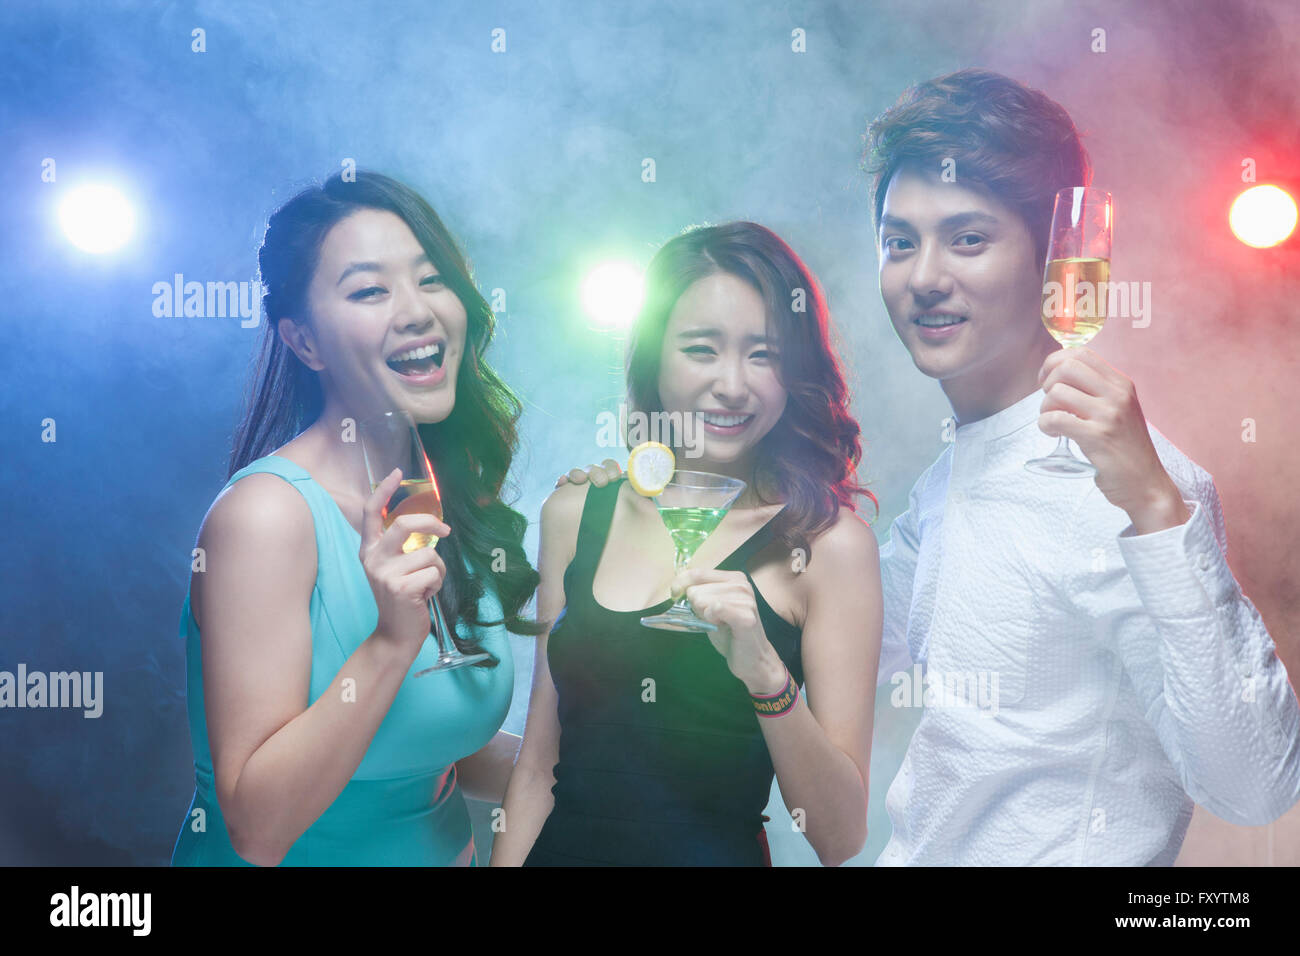 Portrait of three young smiling people posing with drinks staring at front at nightclub Stock Photo